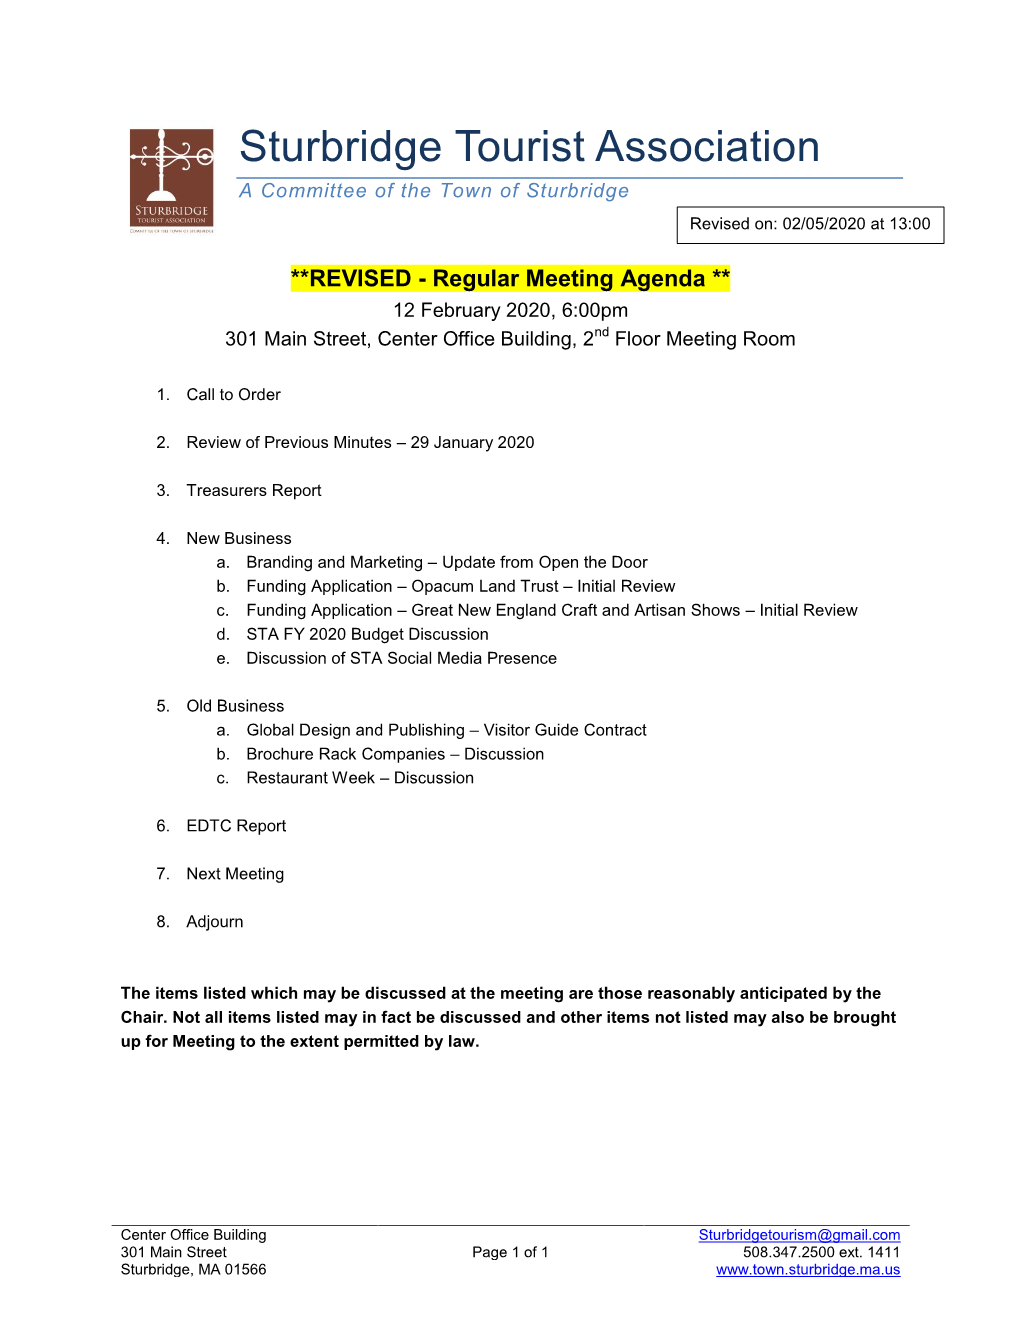 Sturbridge Tourist Association a Committee of the Town of Sturbridge Revised On: 02/05/2020 at 13:00